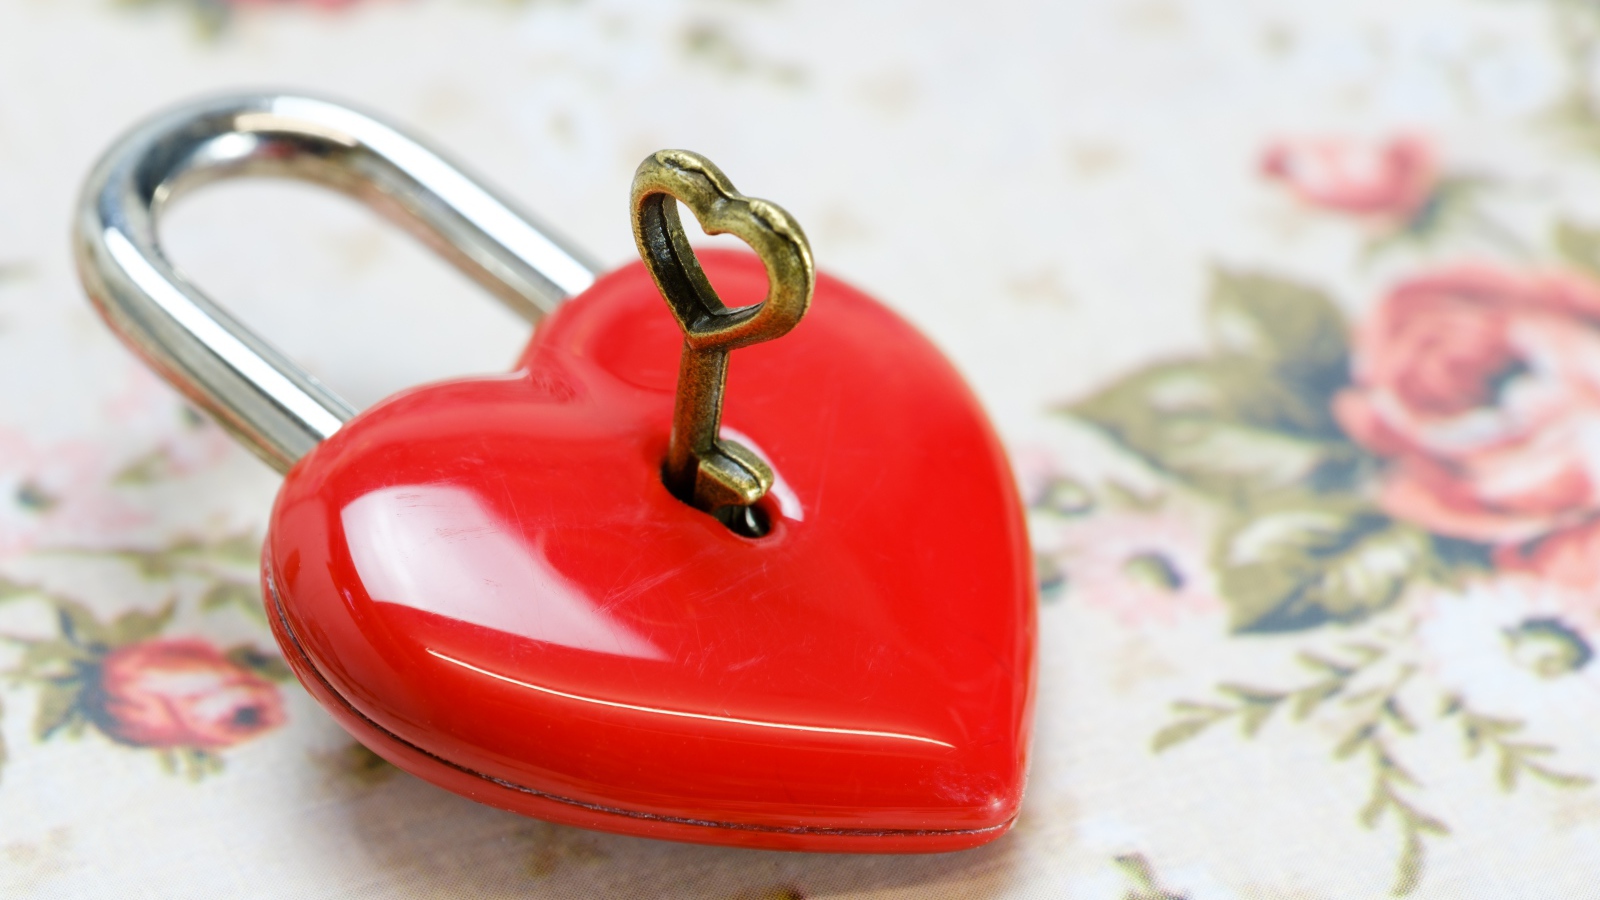 Red heart shaped lock with key